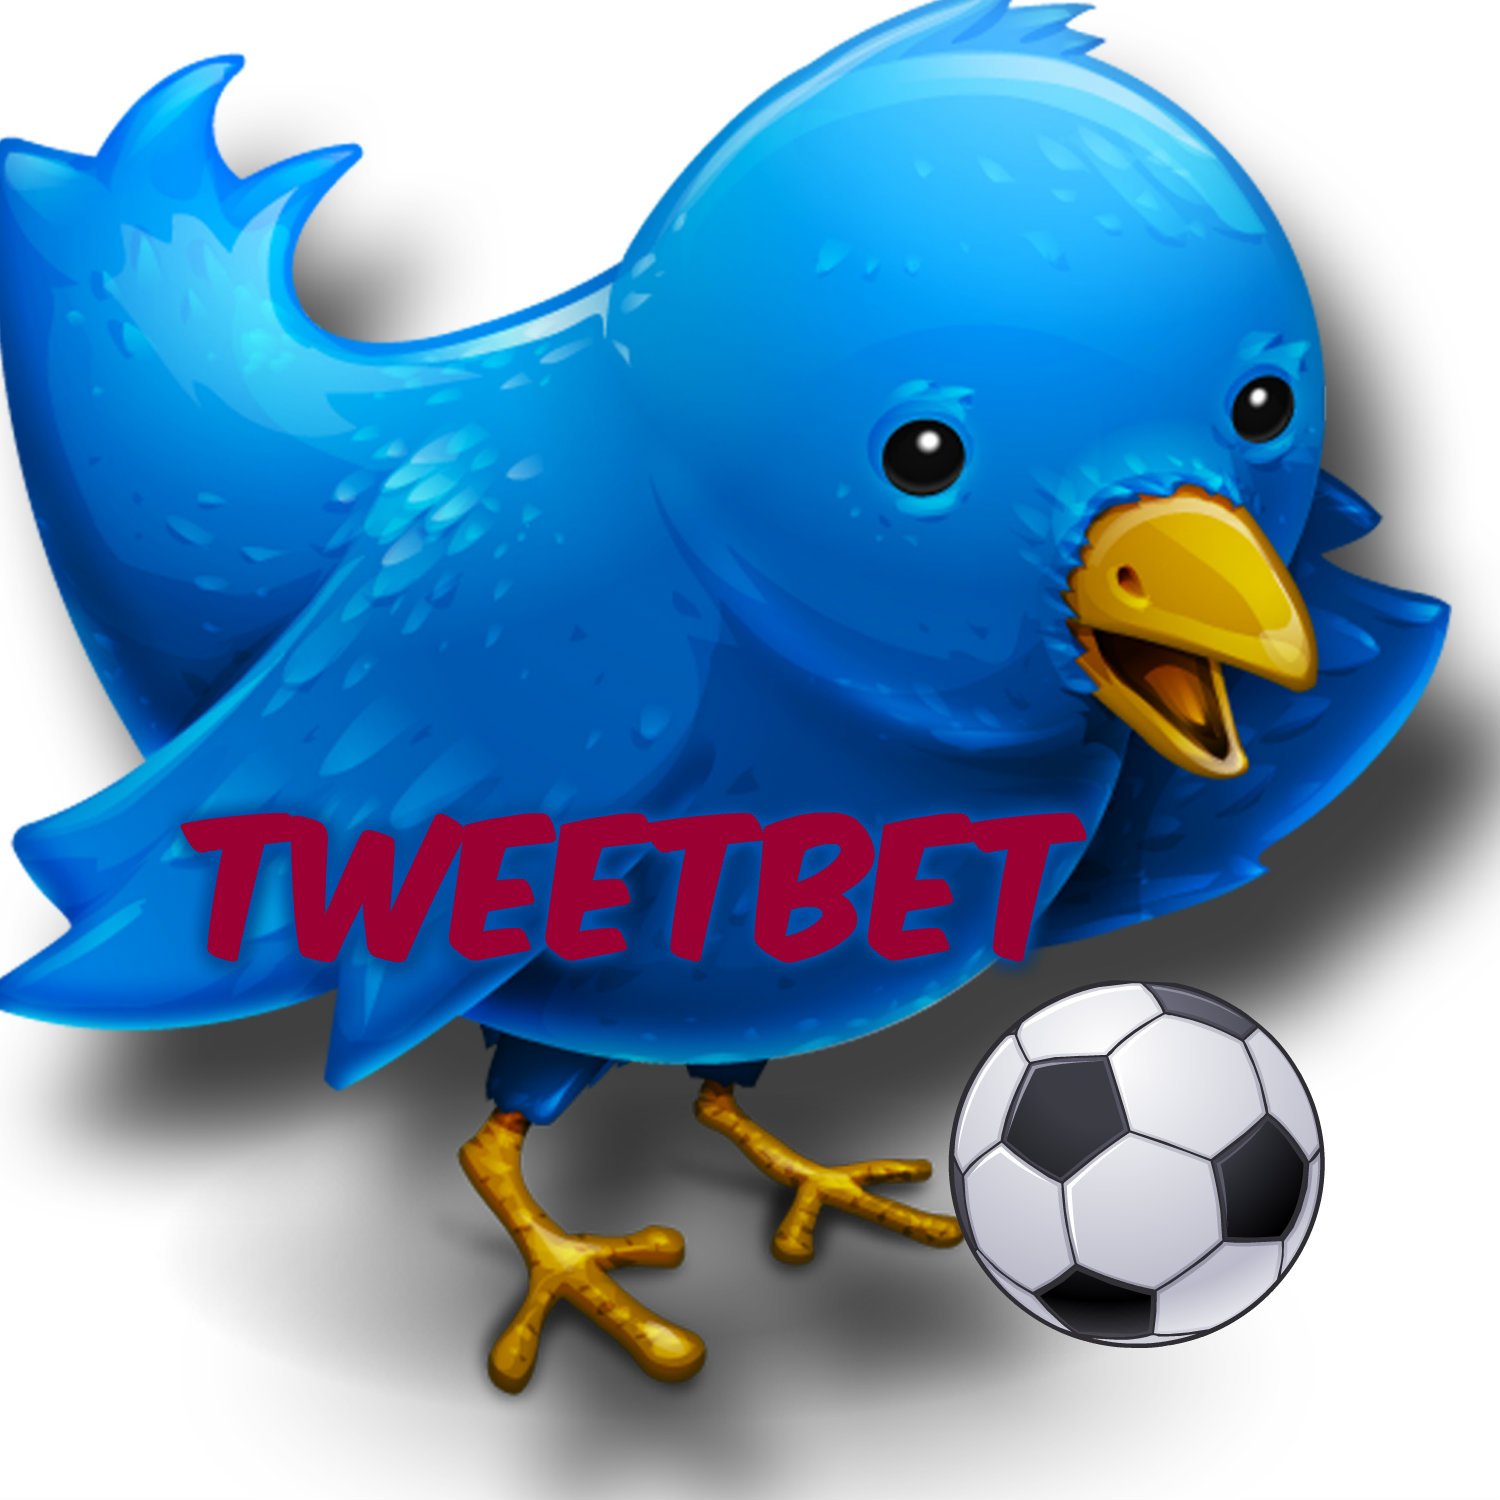 TweetBet- Odds Comparison and Betting Statistics.
Comapre odds from over 47 bookmakers and improve your betting!